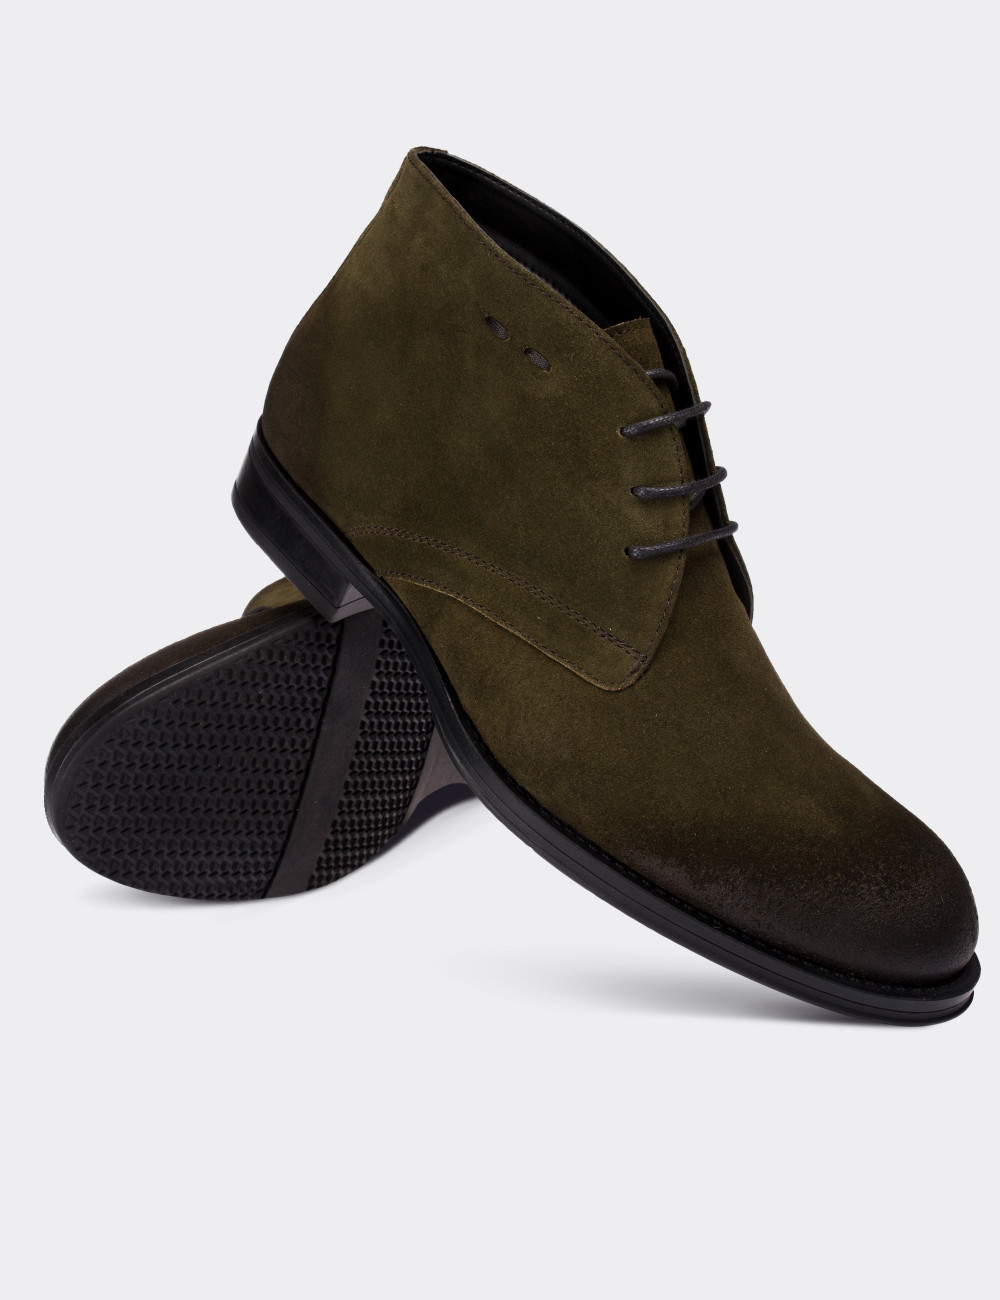 Green Suede Leather Desert Boots - 01295MYSLC01